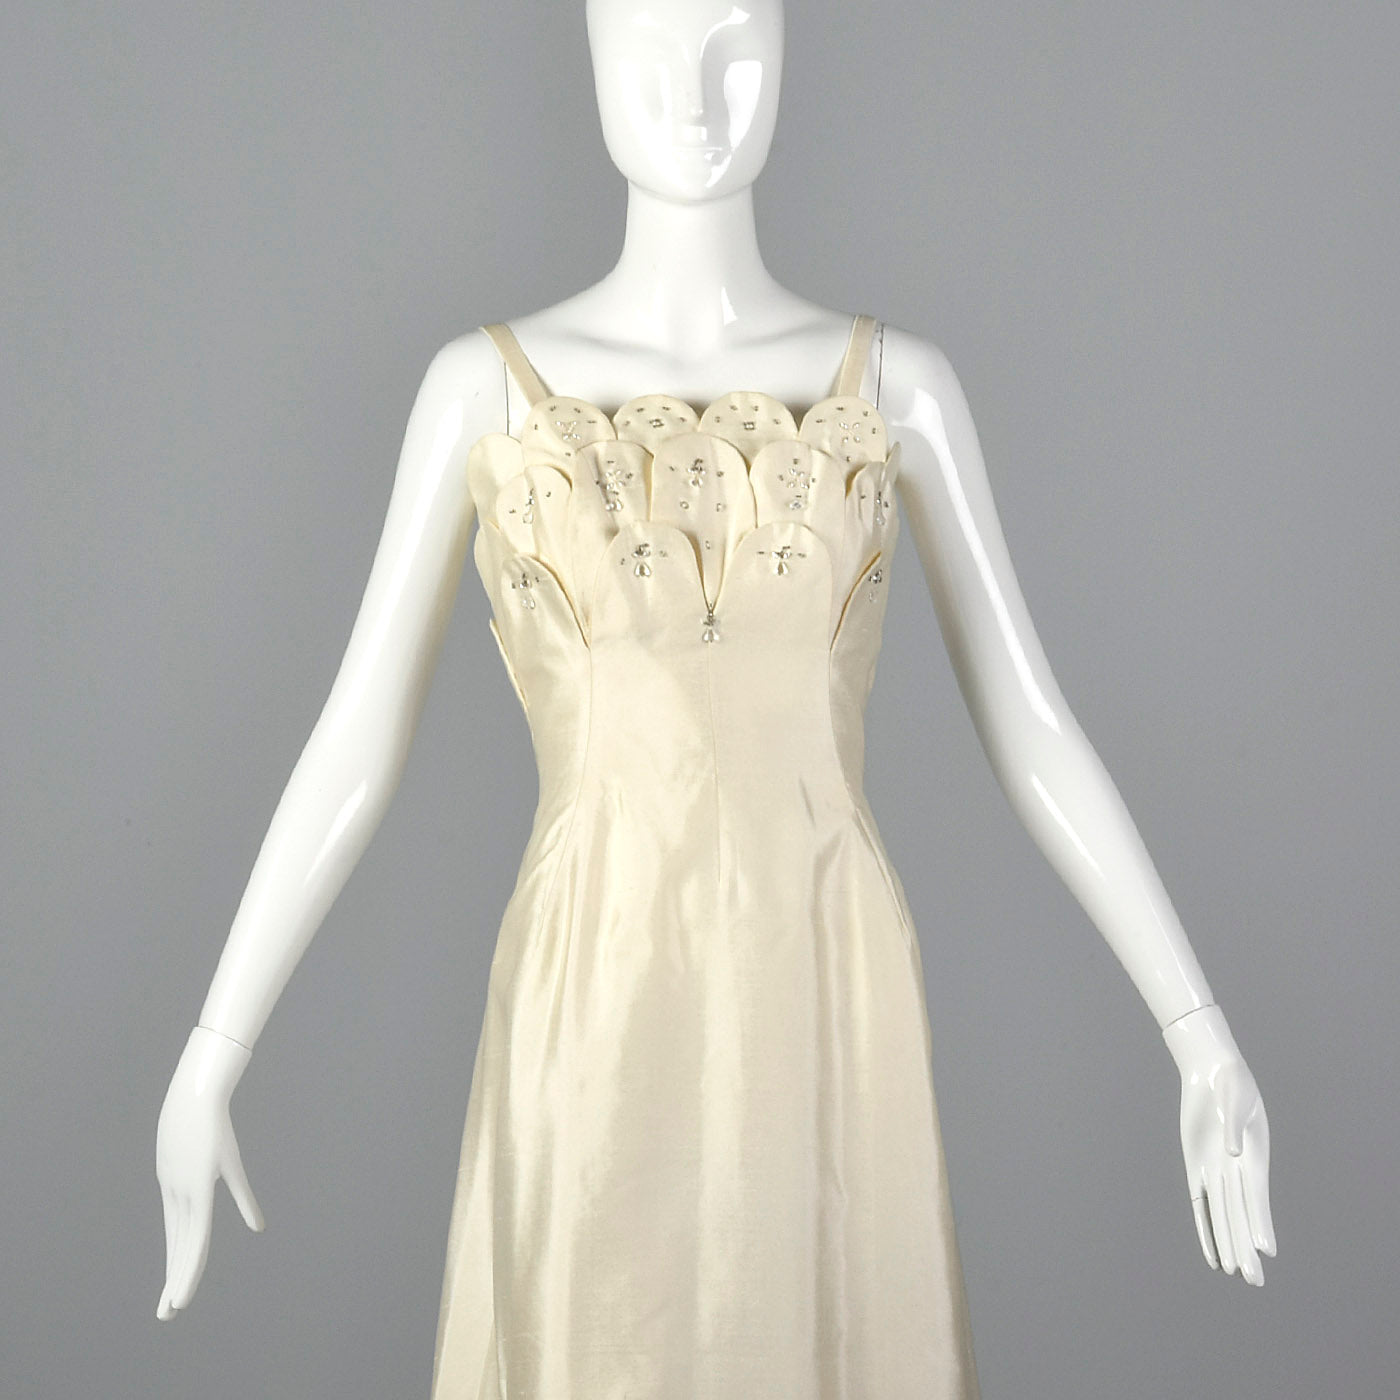 1960s Off White Formal Evening Gown or Wedding Dress